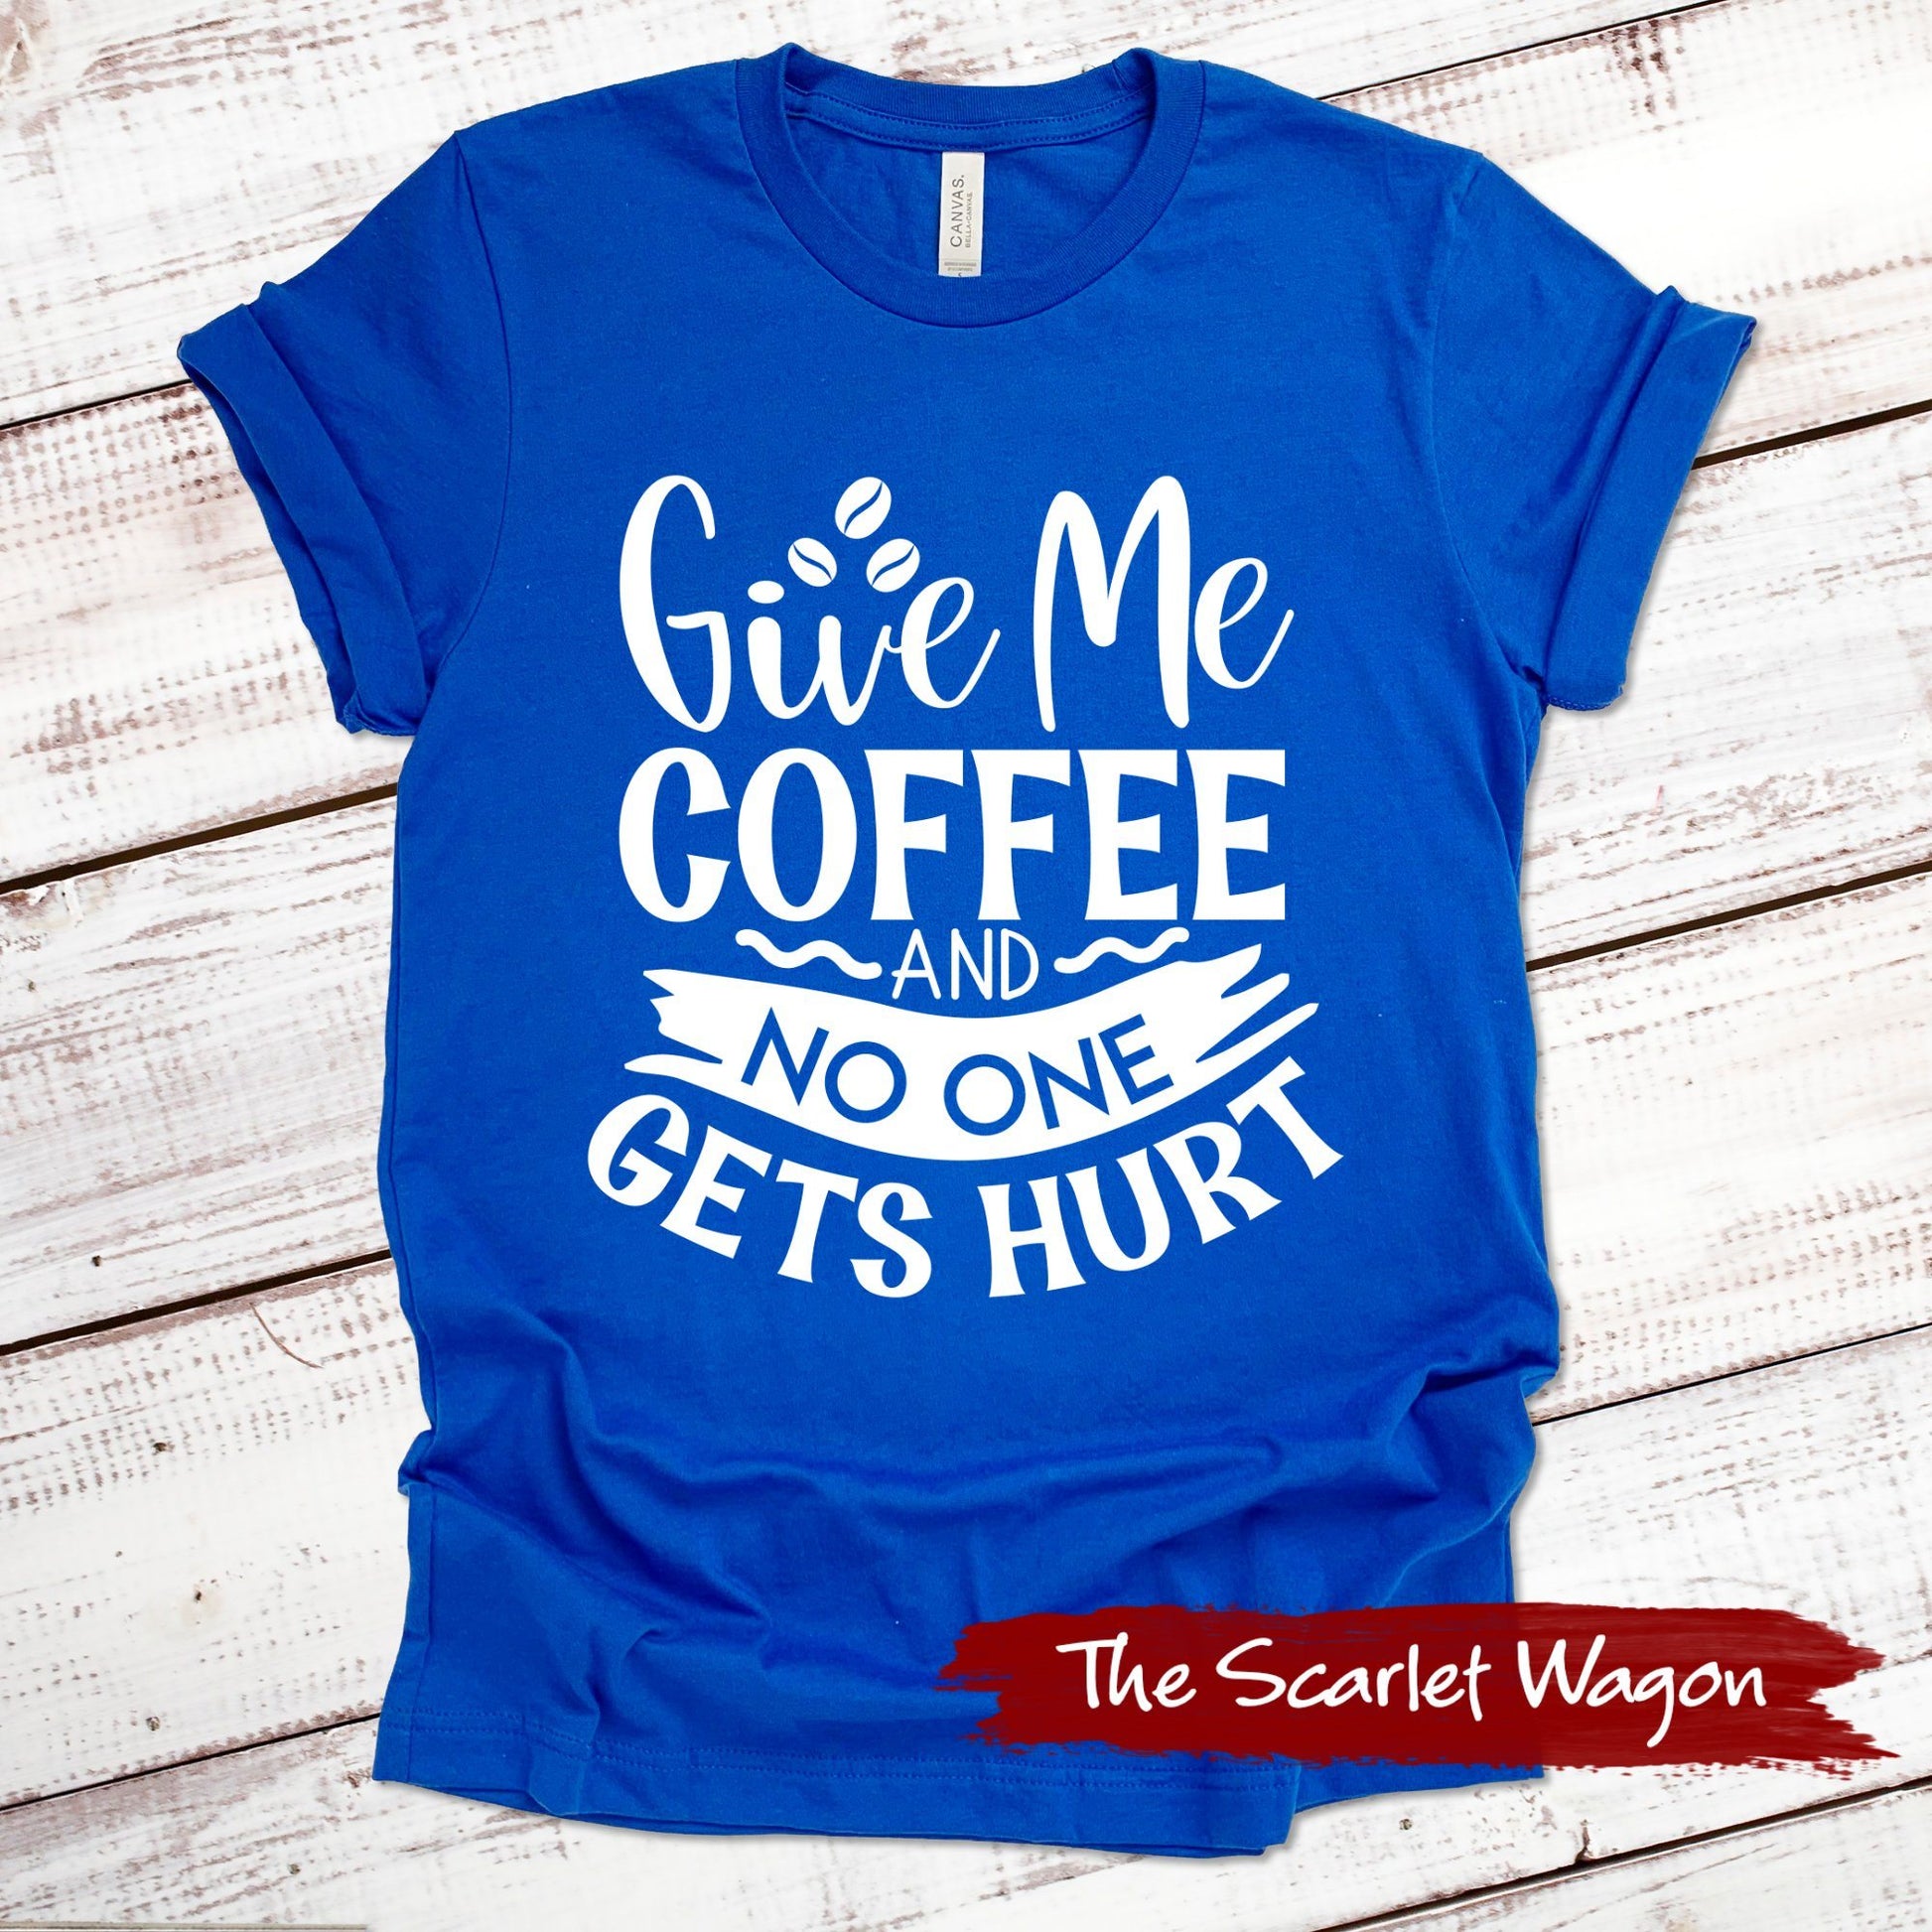 Give Me Coffee and No One Gets Hurt Funny Shirt Scarlet Wagon True Royal XS 